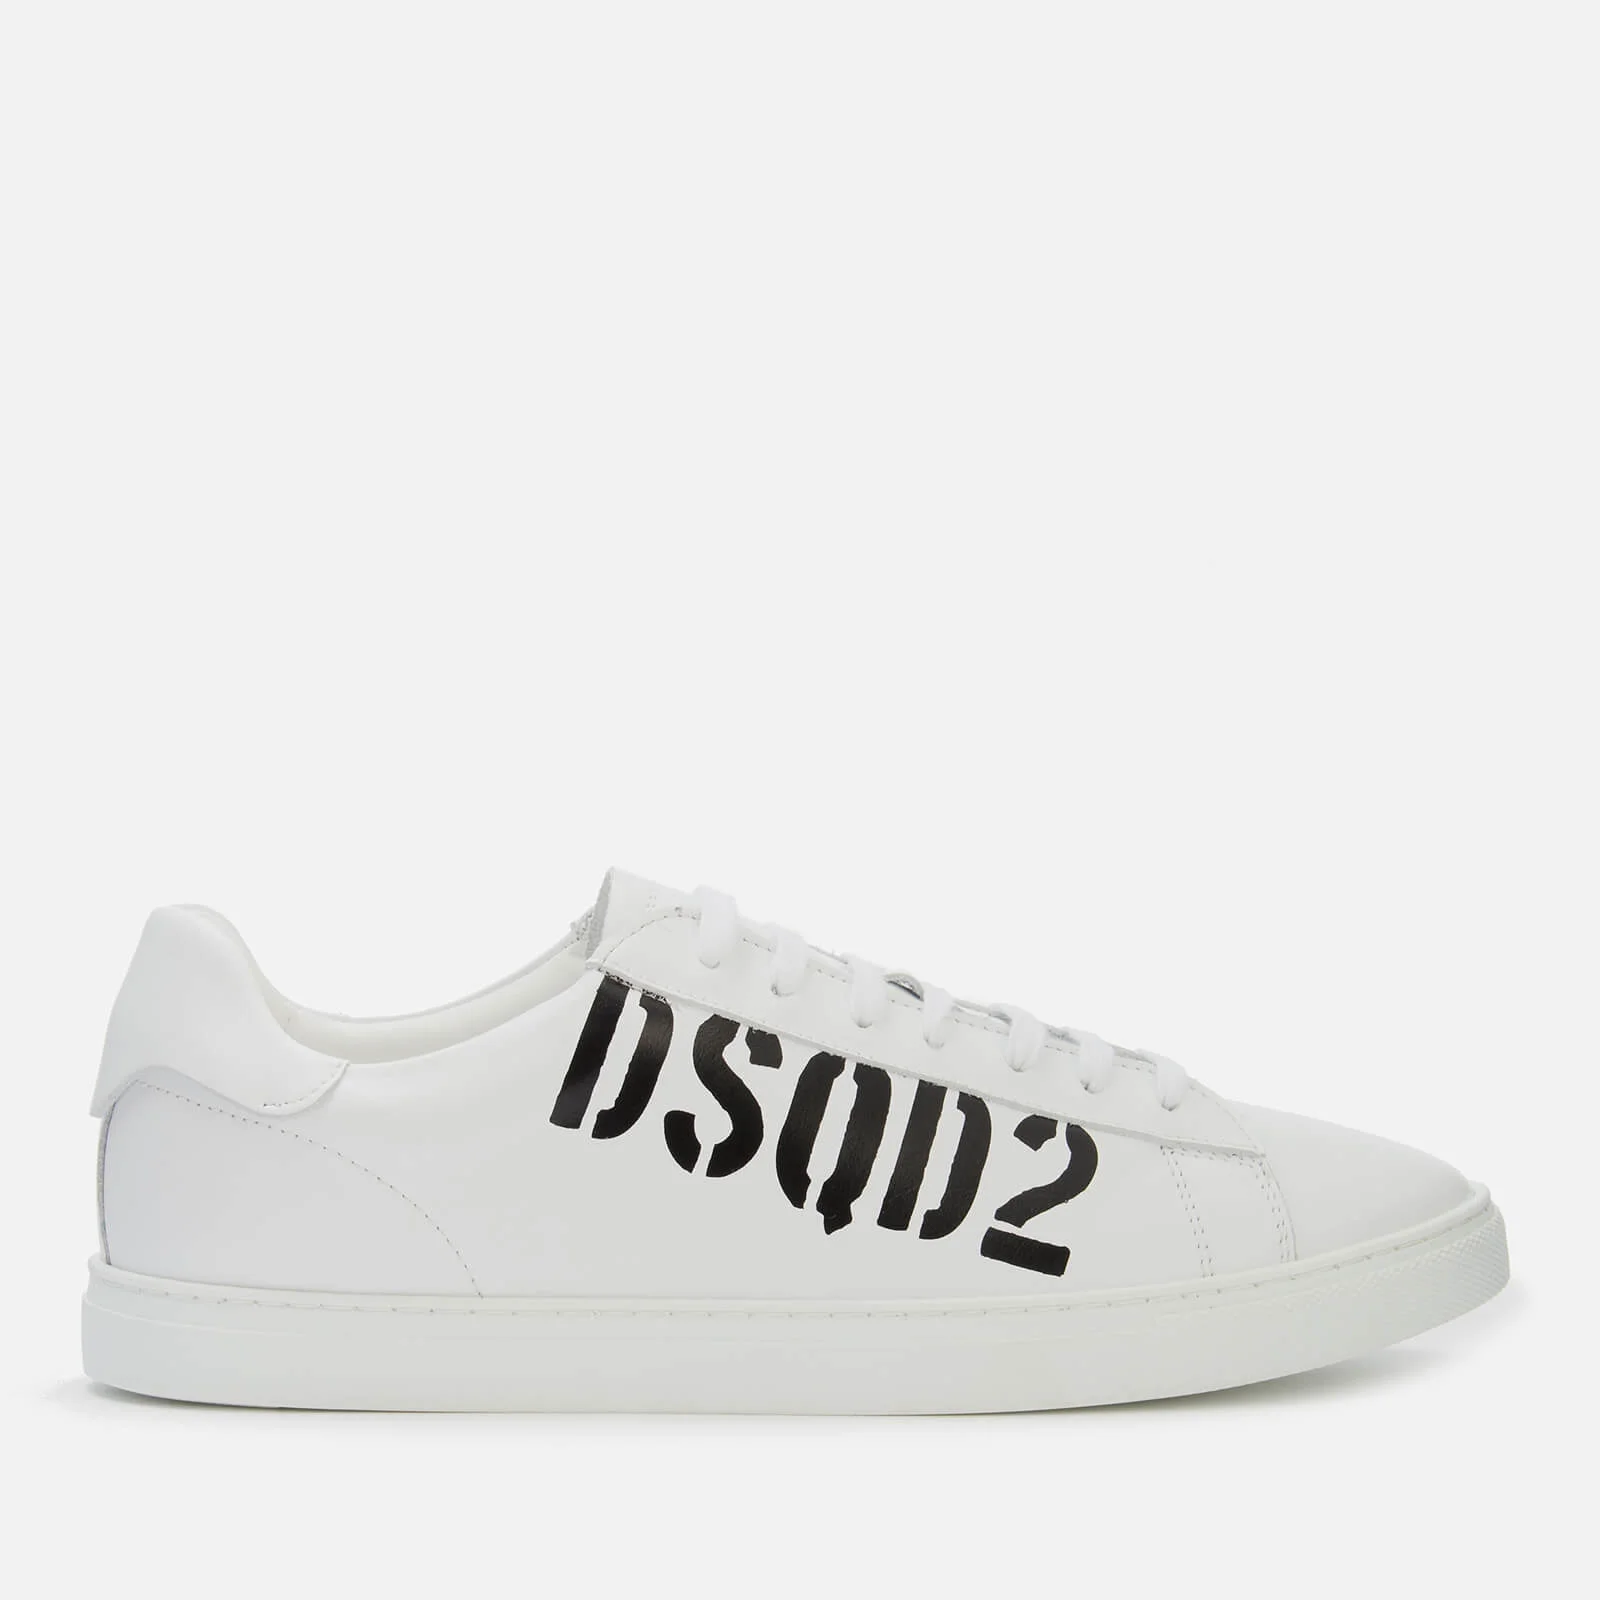 Dsquared2 Men's New Tennis Trainers - White Image 1